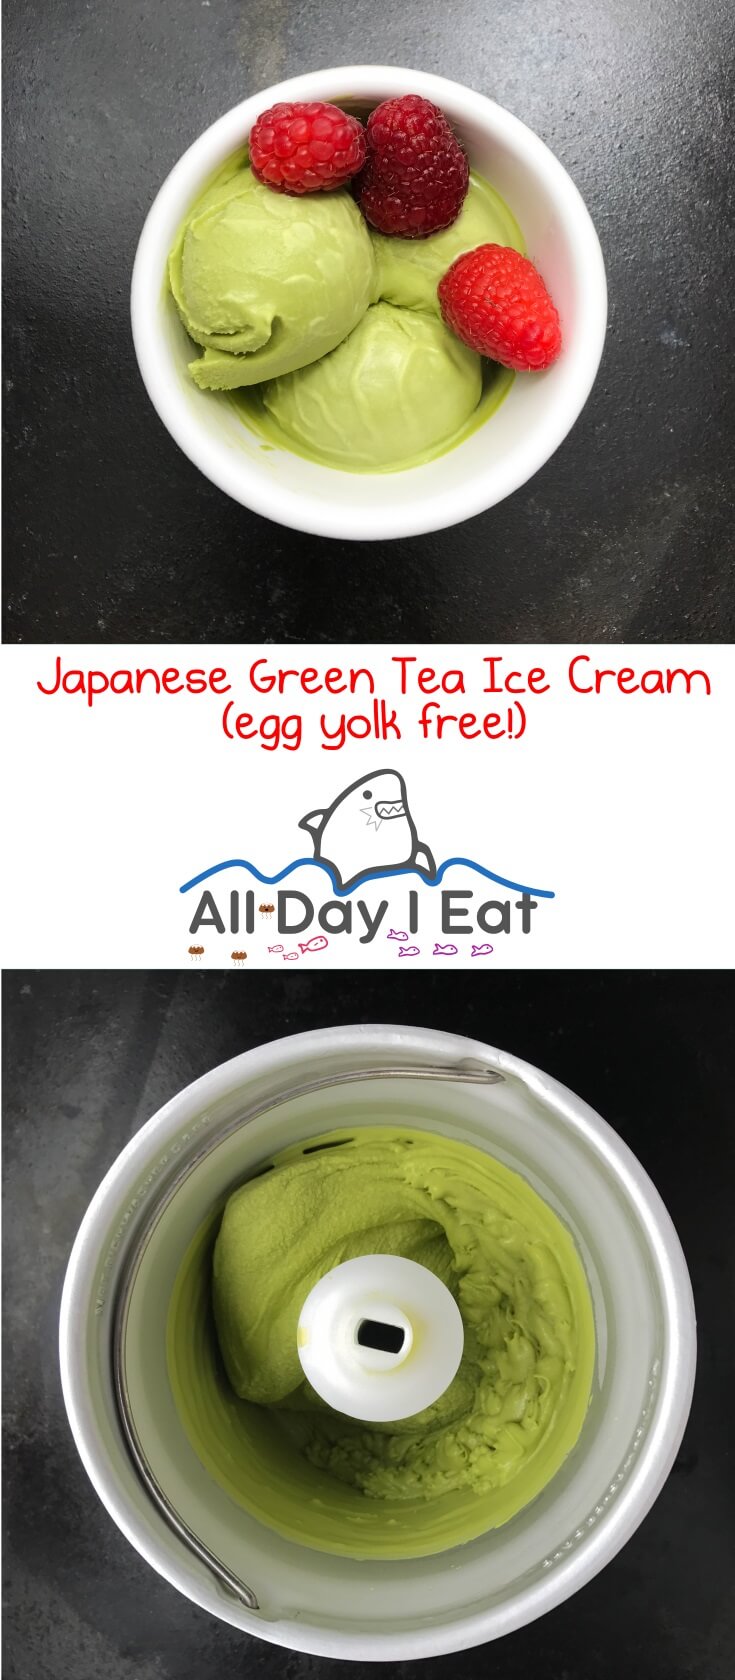 Japanese Green Tea Ice Cream (egg yolk free!). A tasty and reduced guilt way to increase your green tea consumption and satisfy your sweet tooth! | www.alldayieat.com